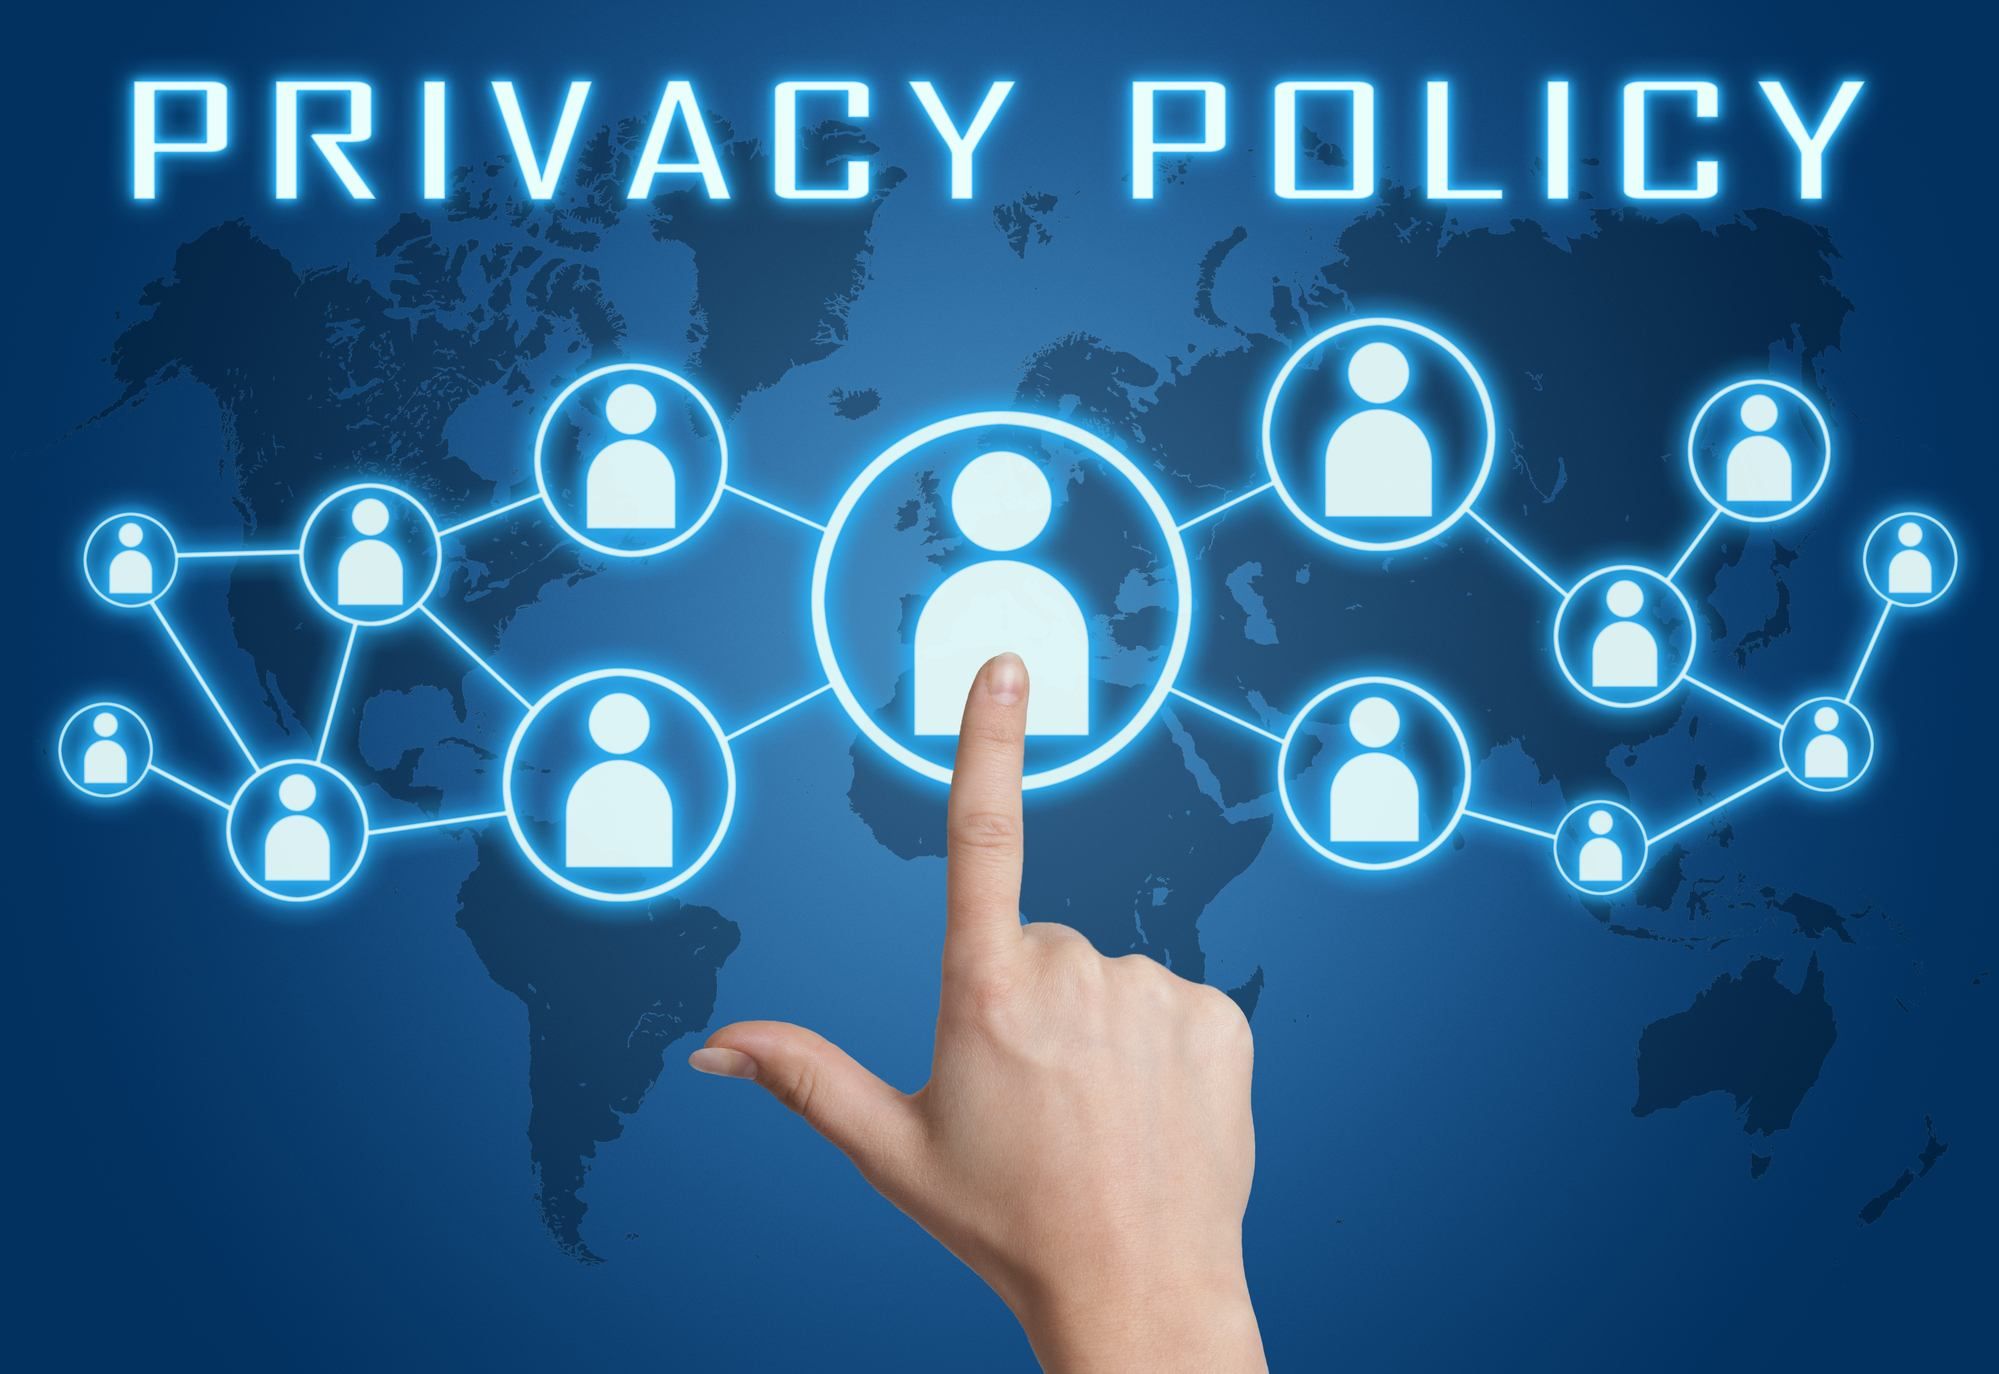 Data privacy policy laws affect everyone